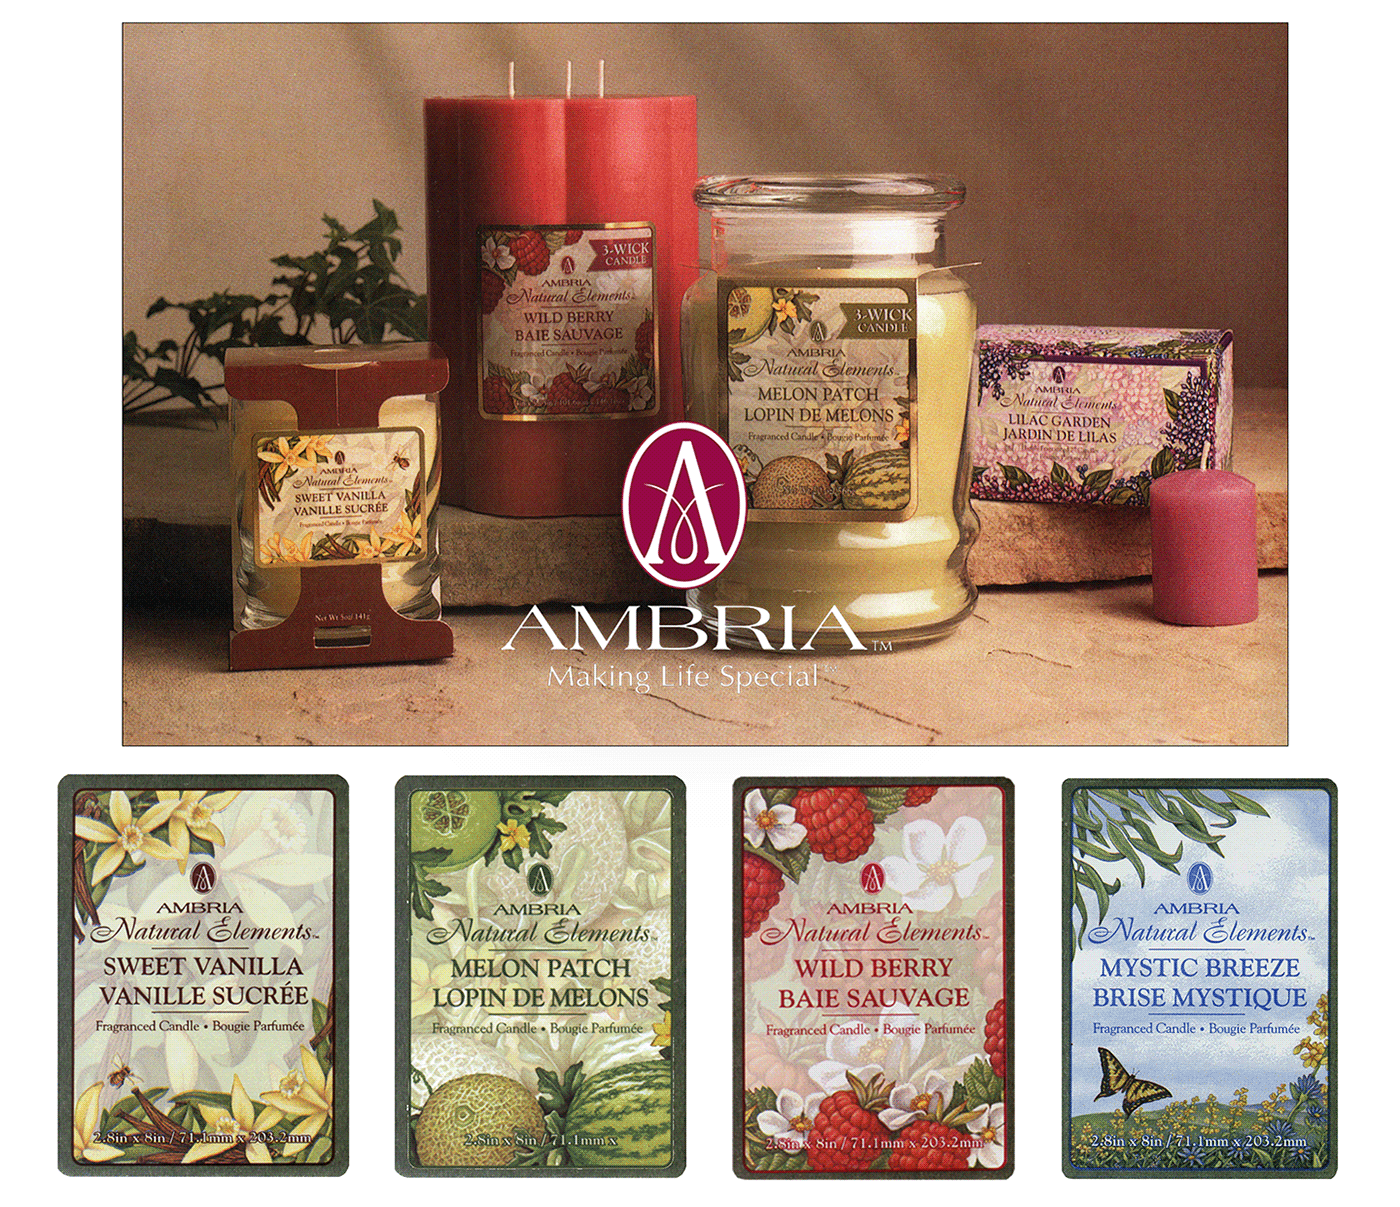 Fruit and botanical illustrations used on packaging for Ambria candles.